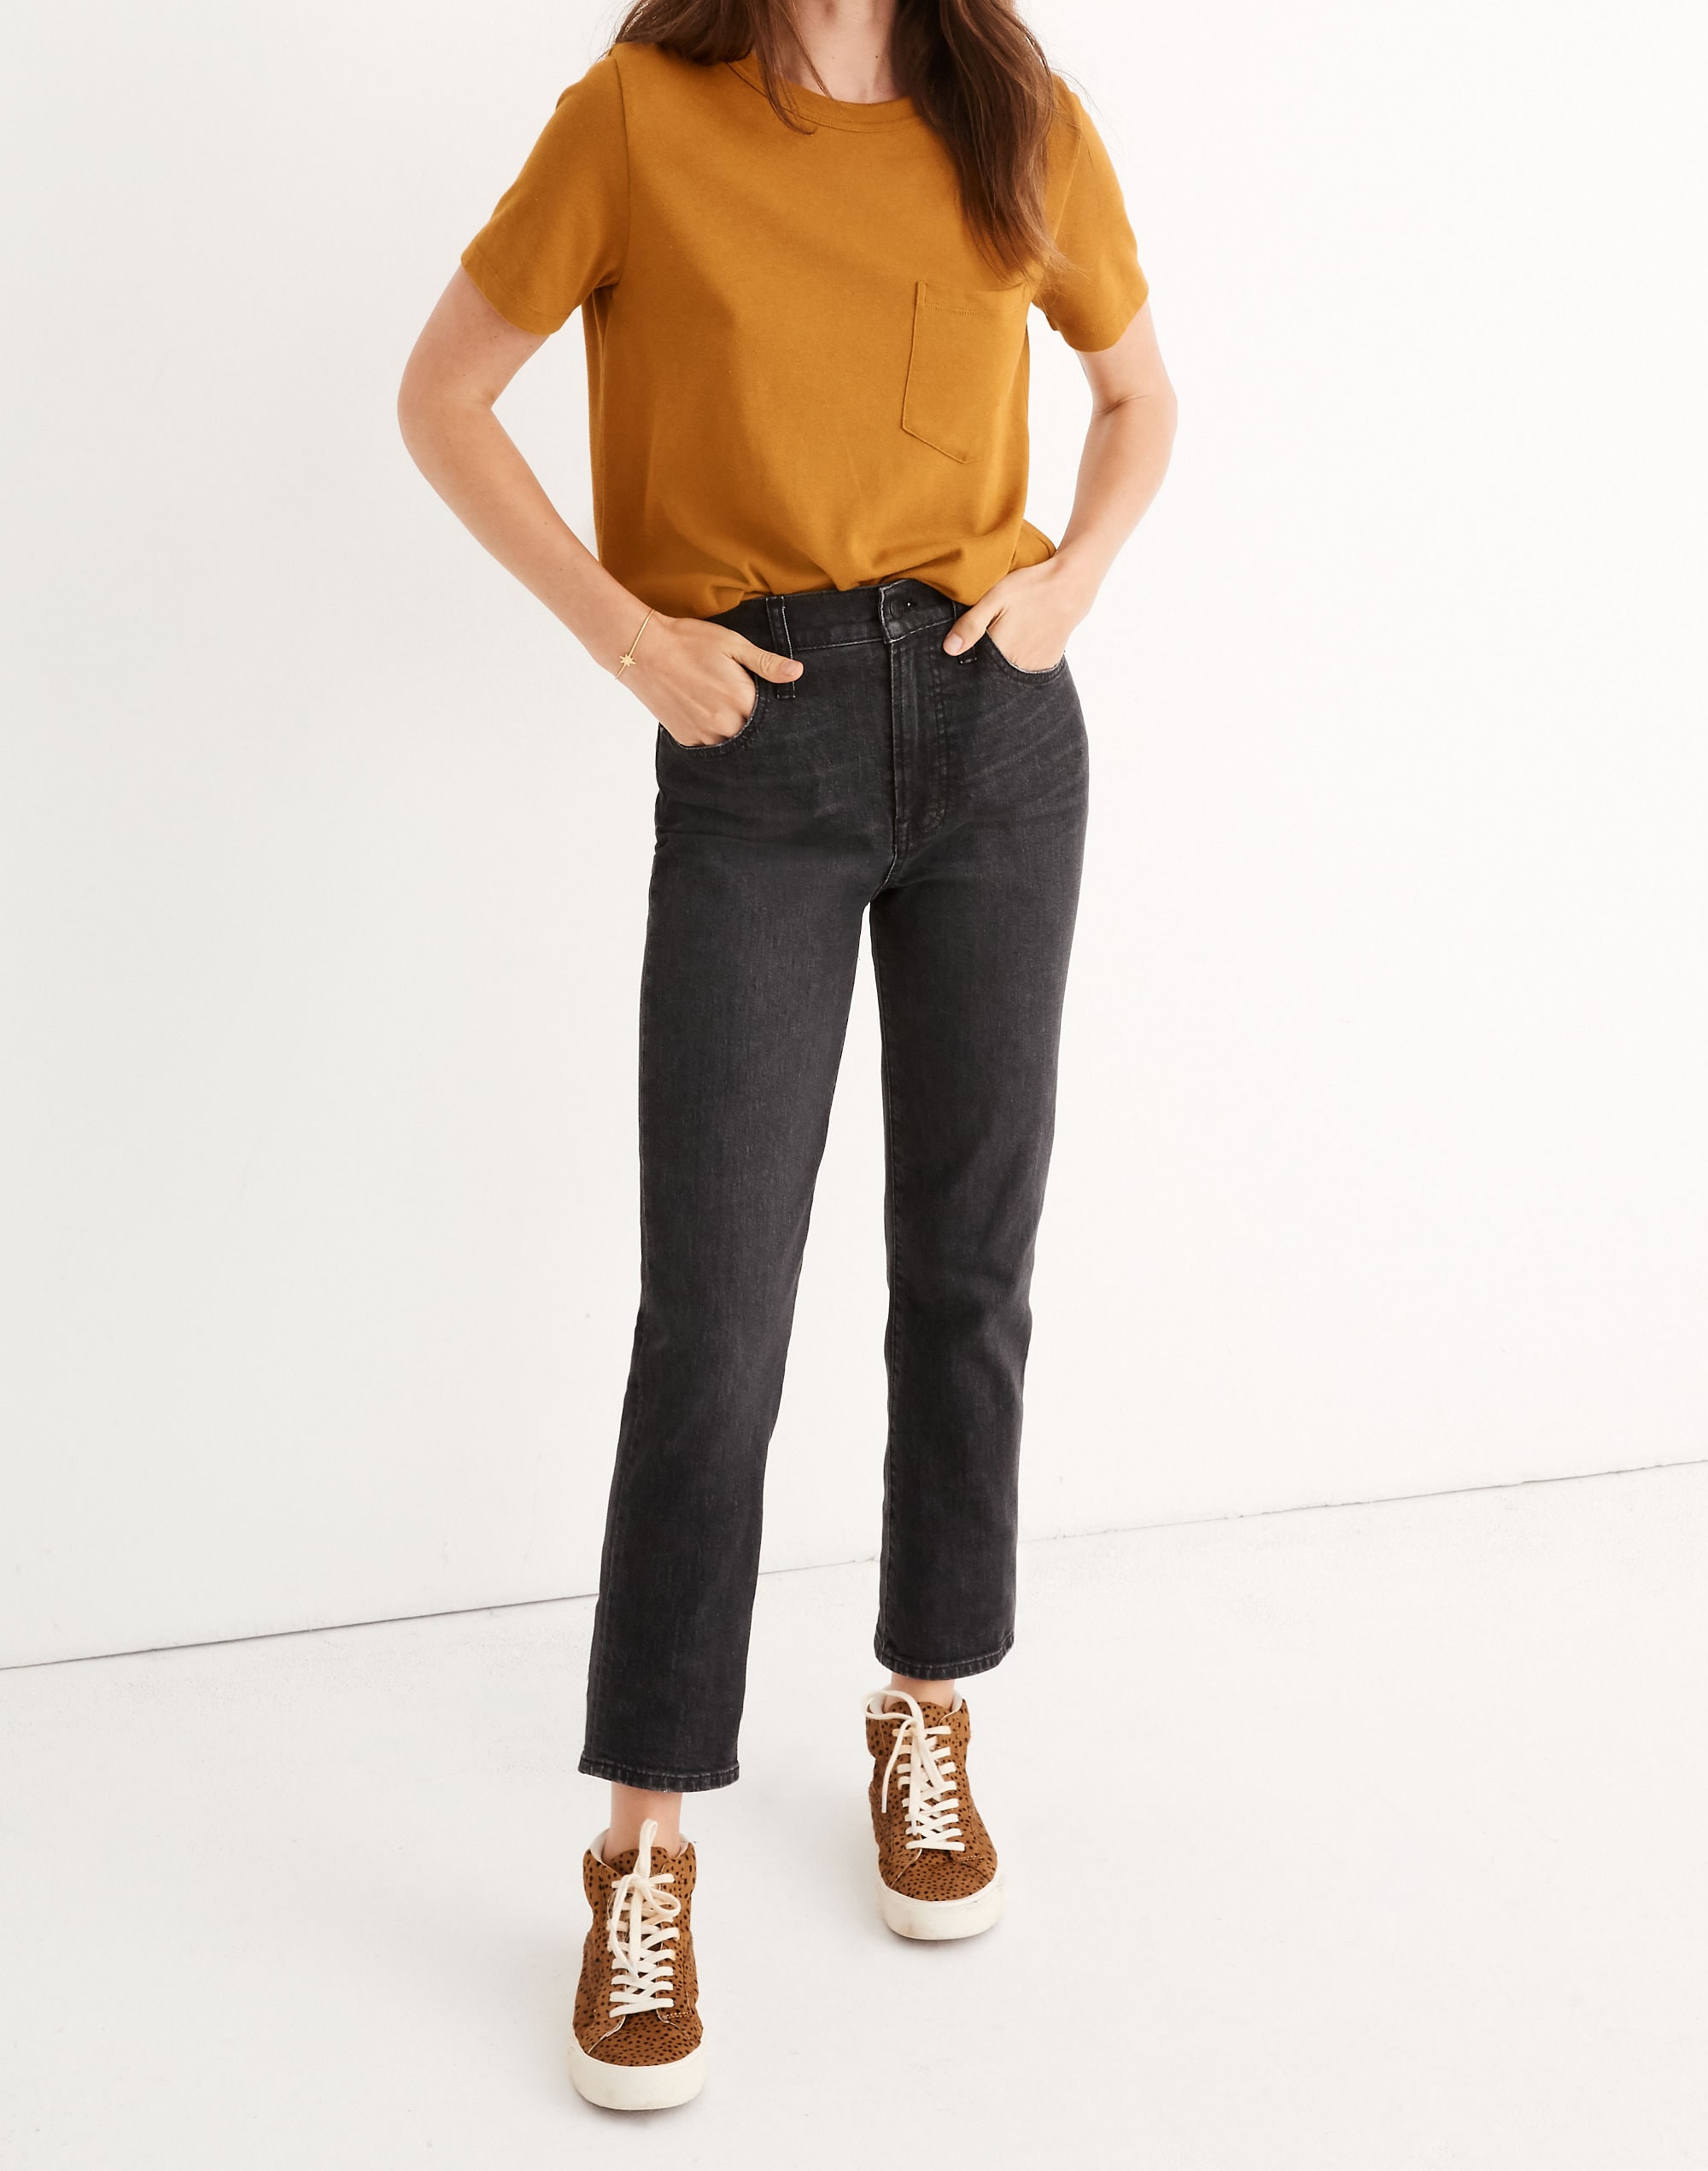 The Petite Perfect Vintage Jean in Sumner Wash